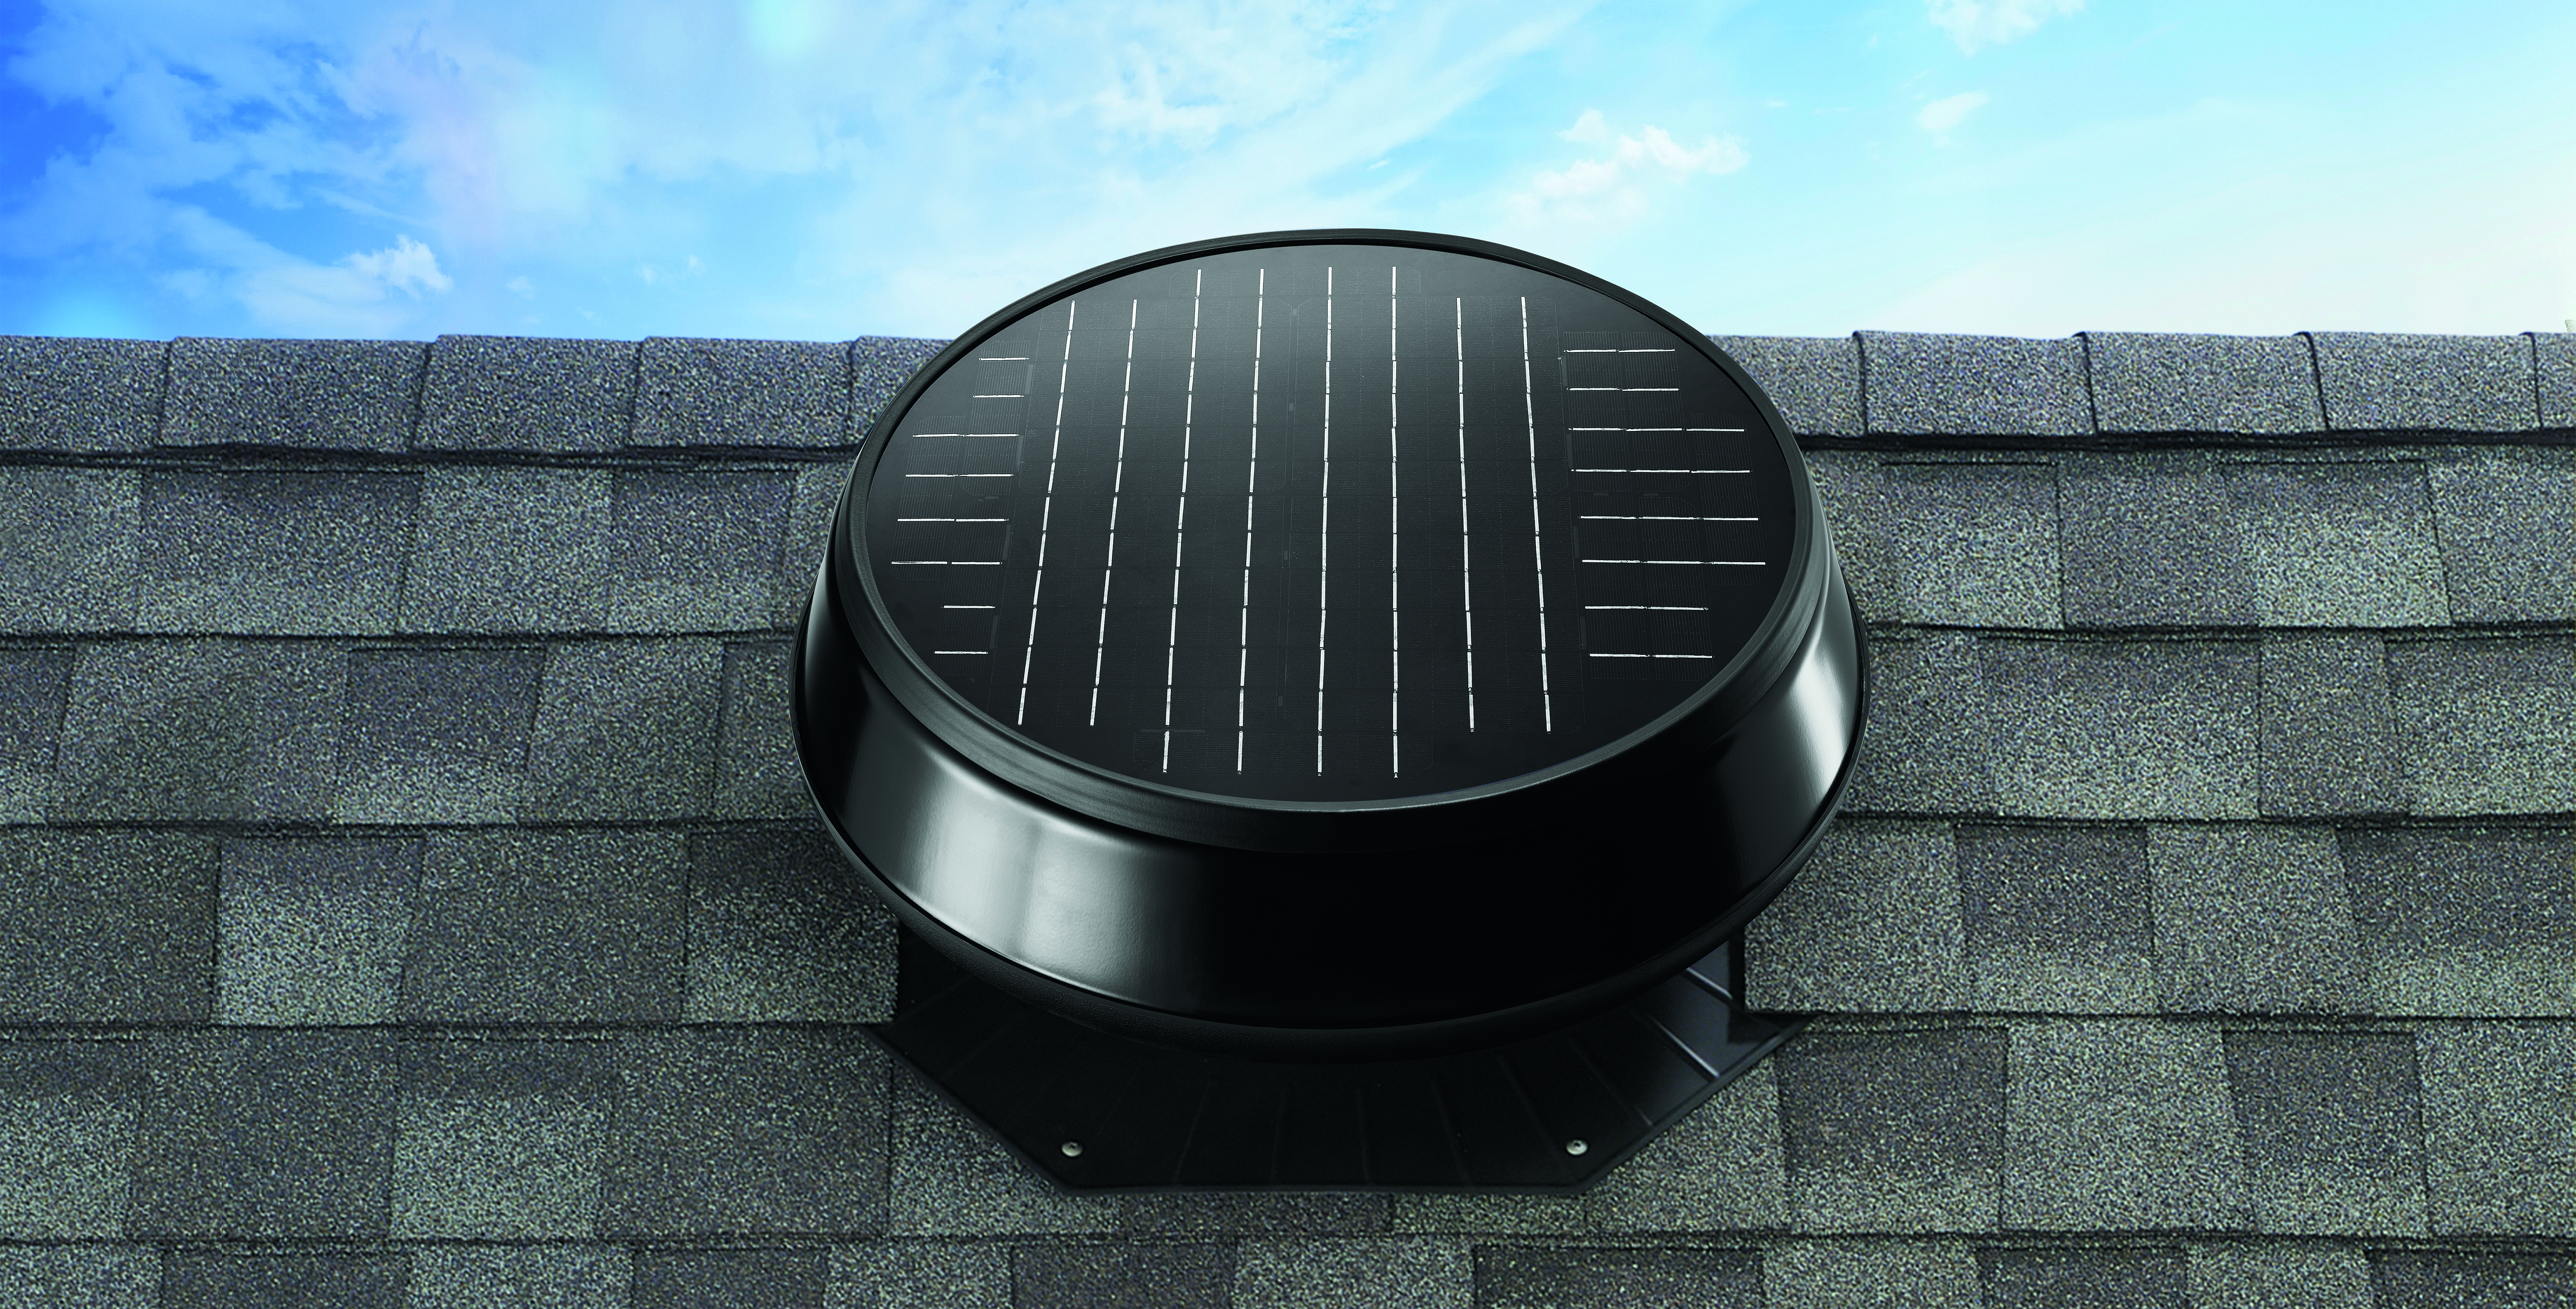 Solar powered attic fans mount on your roof.